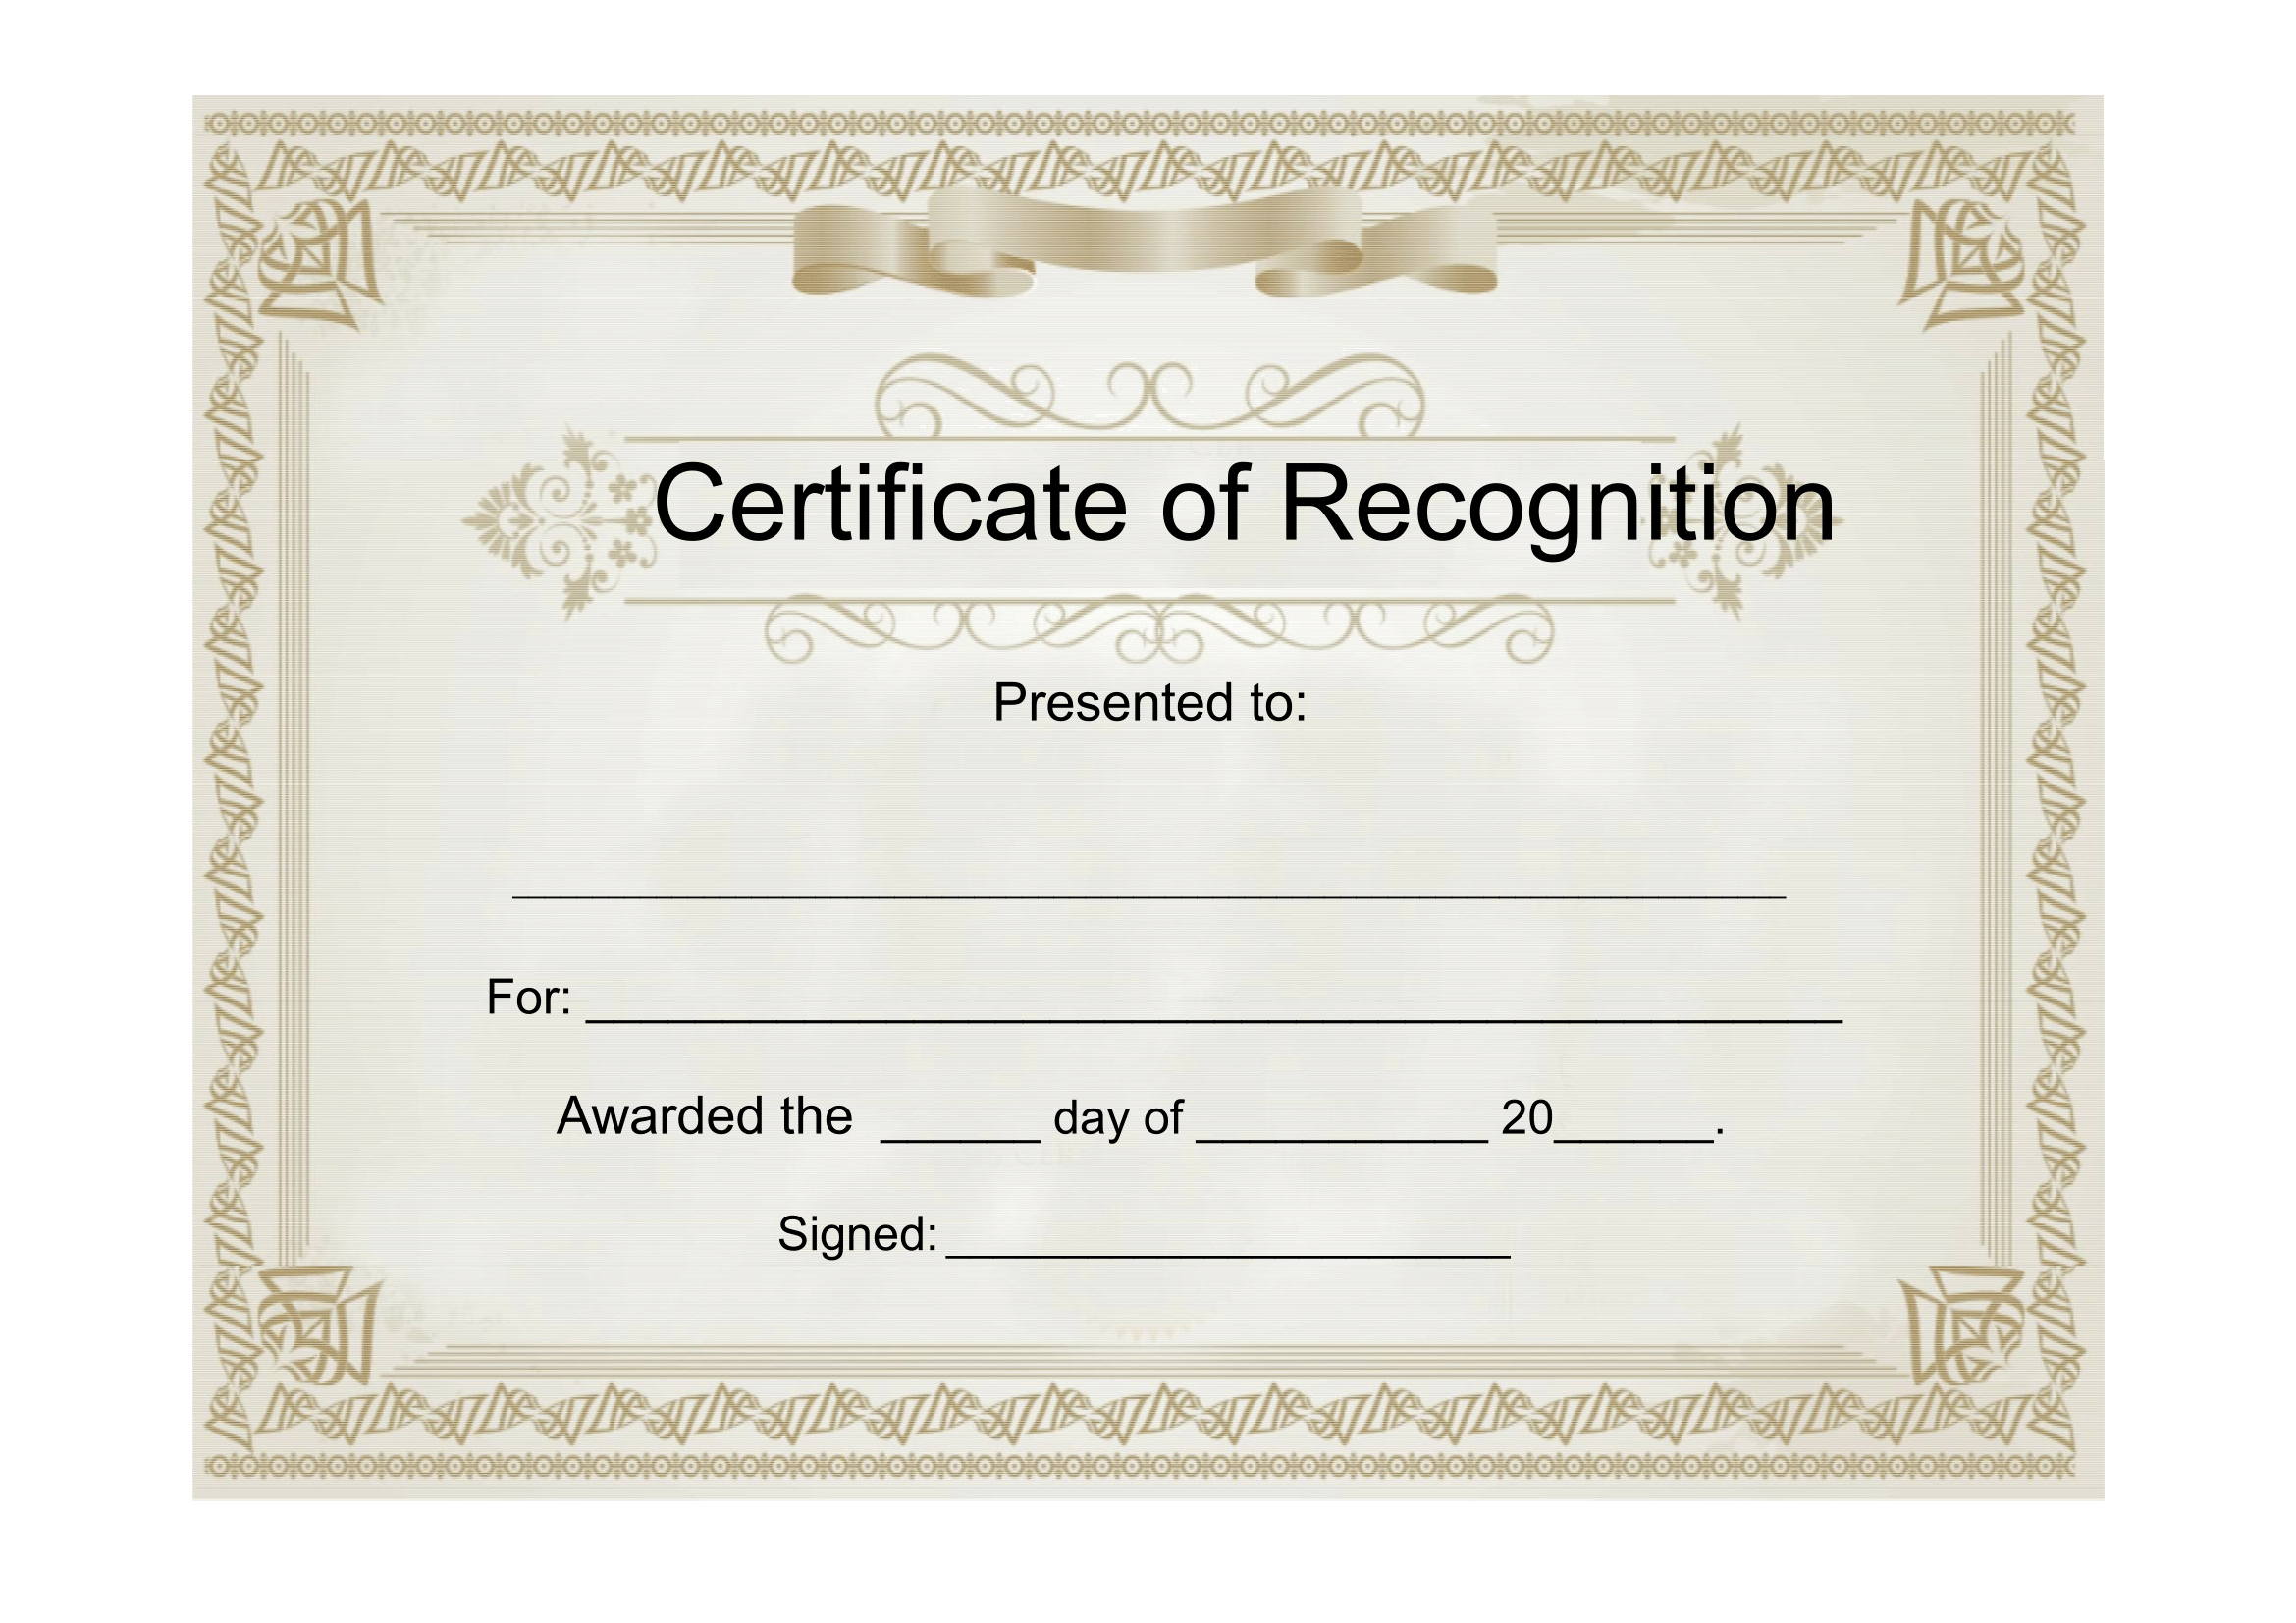 Sample Certificate Of Recognition – Free Download Template Inside Free Template For Certificate Of Recognition